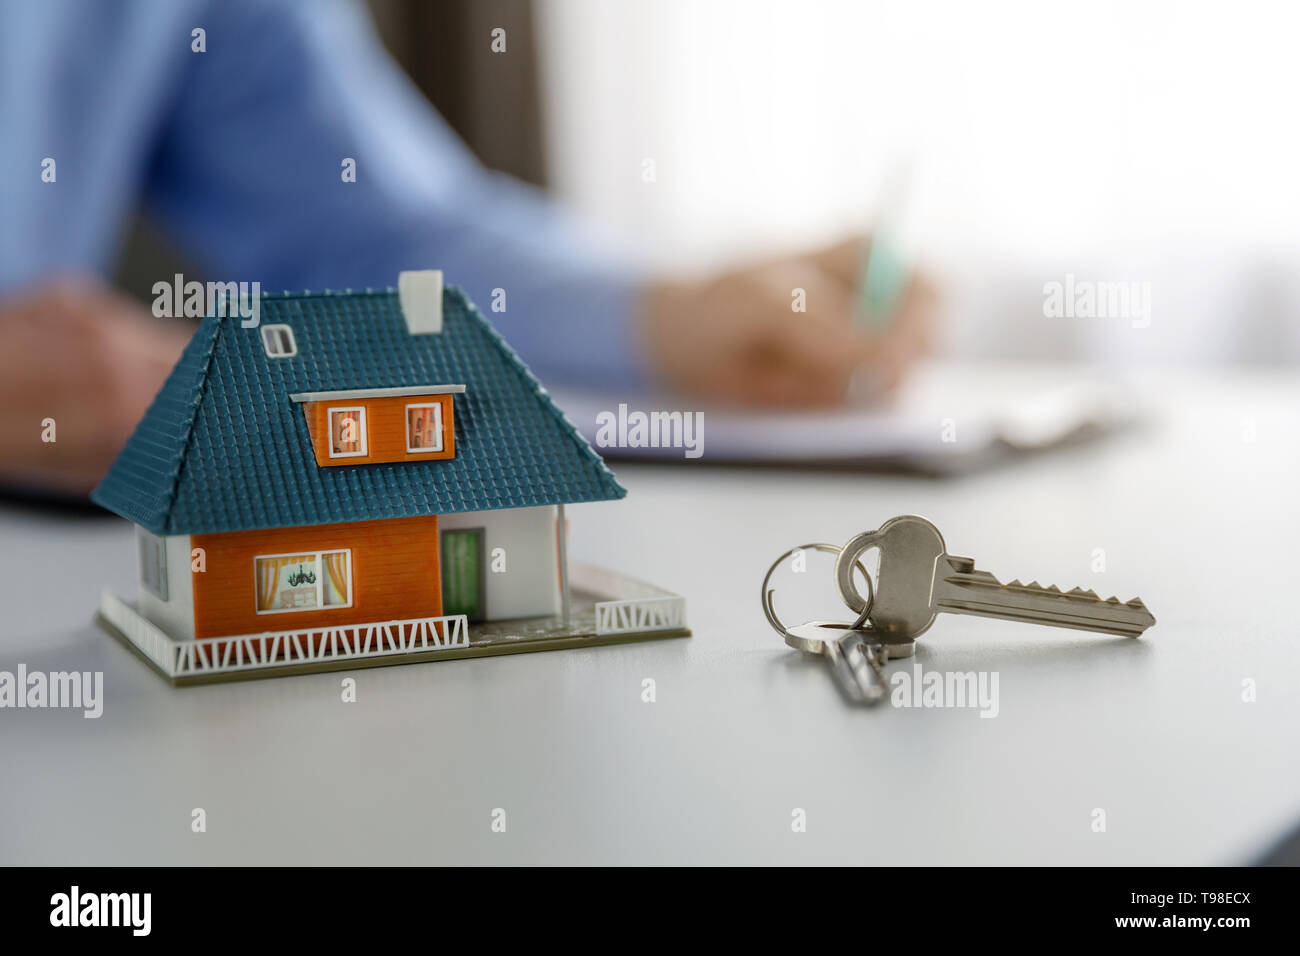 housing development and real estate business concept Stock Photo